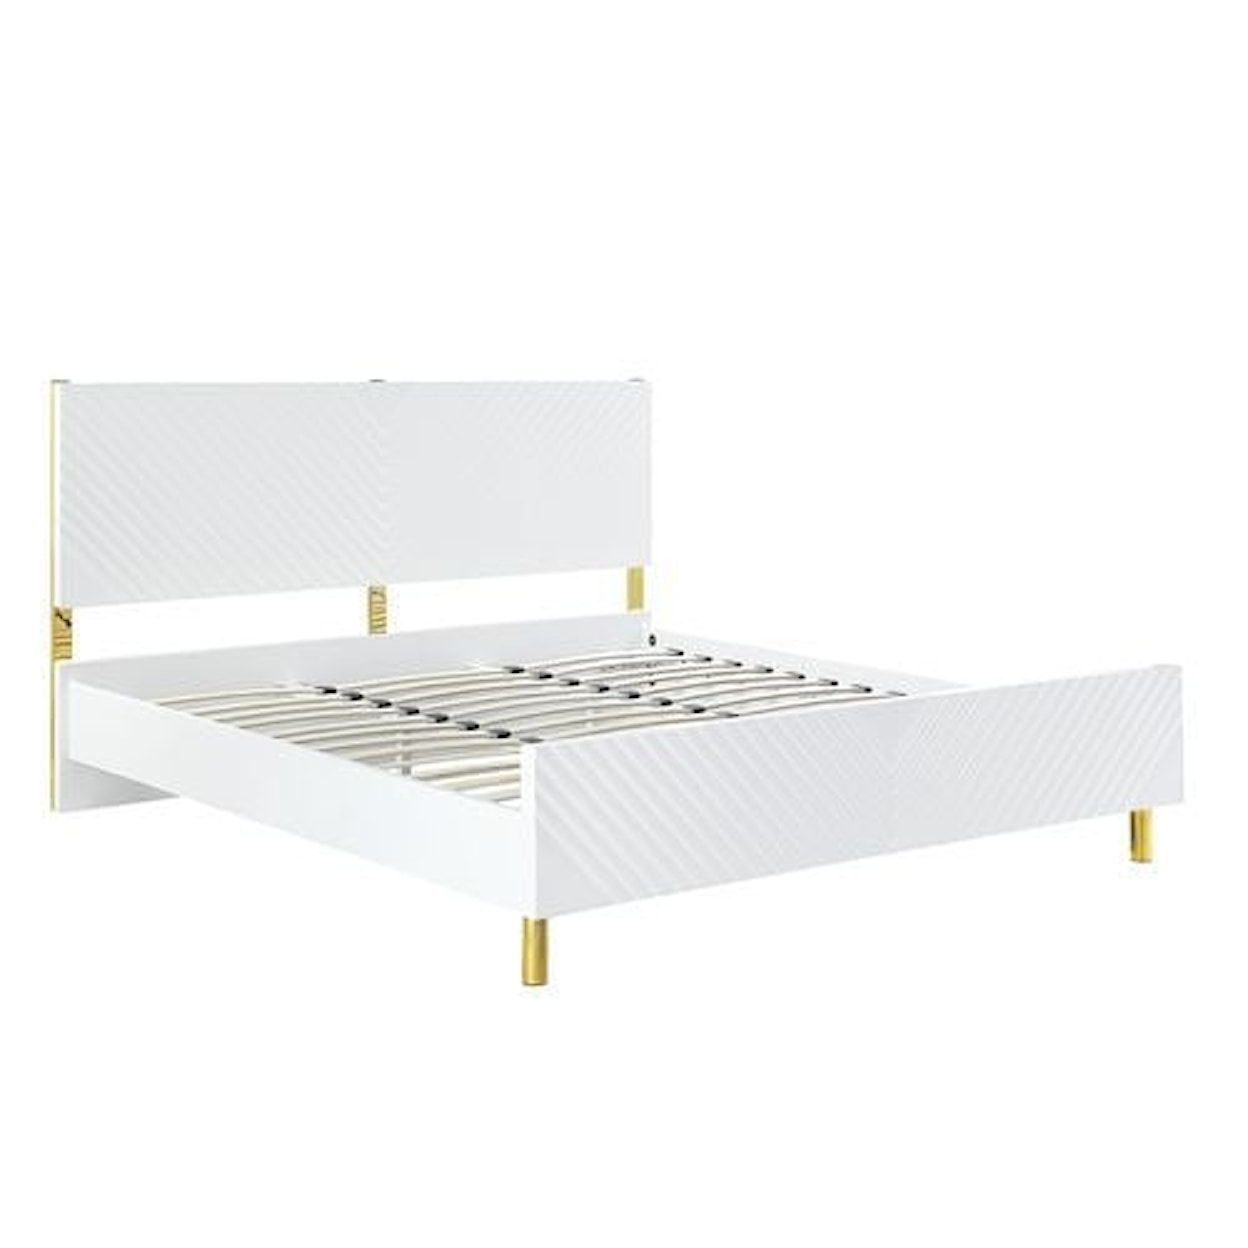 Acme Furniture Gaines King Bed